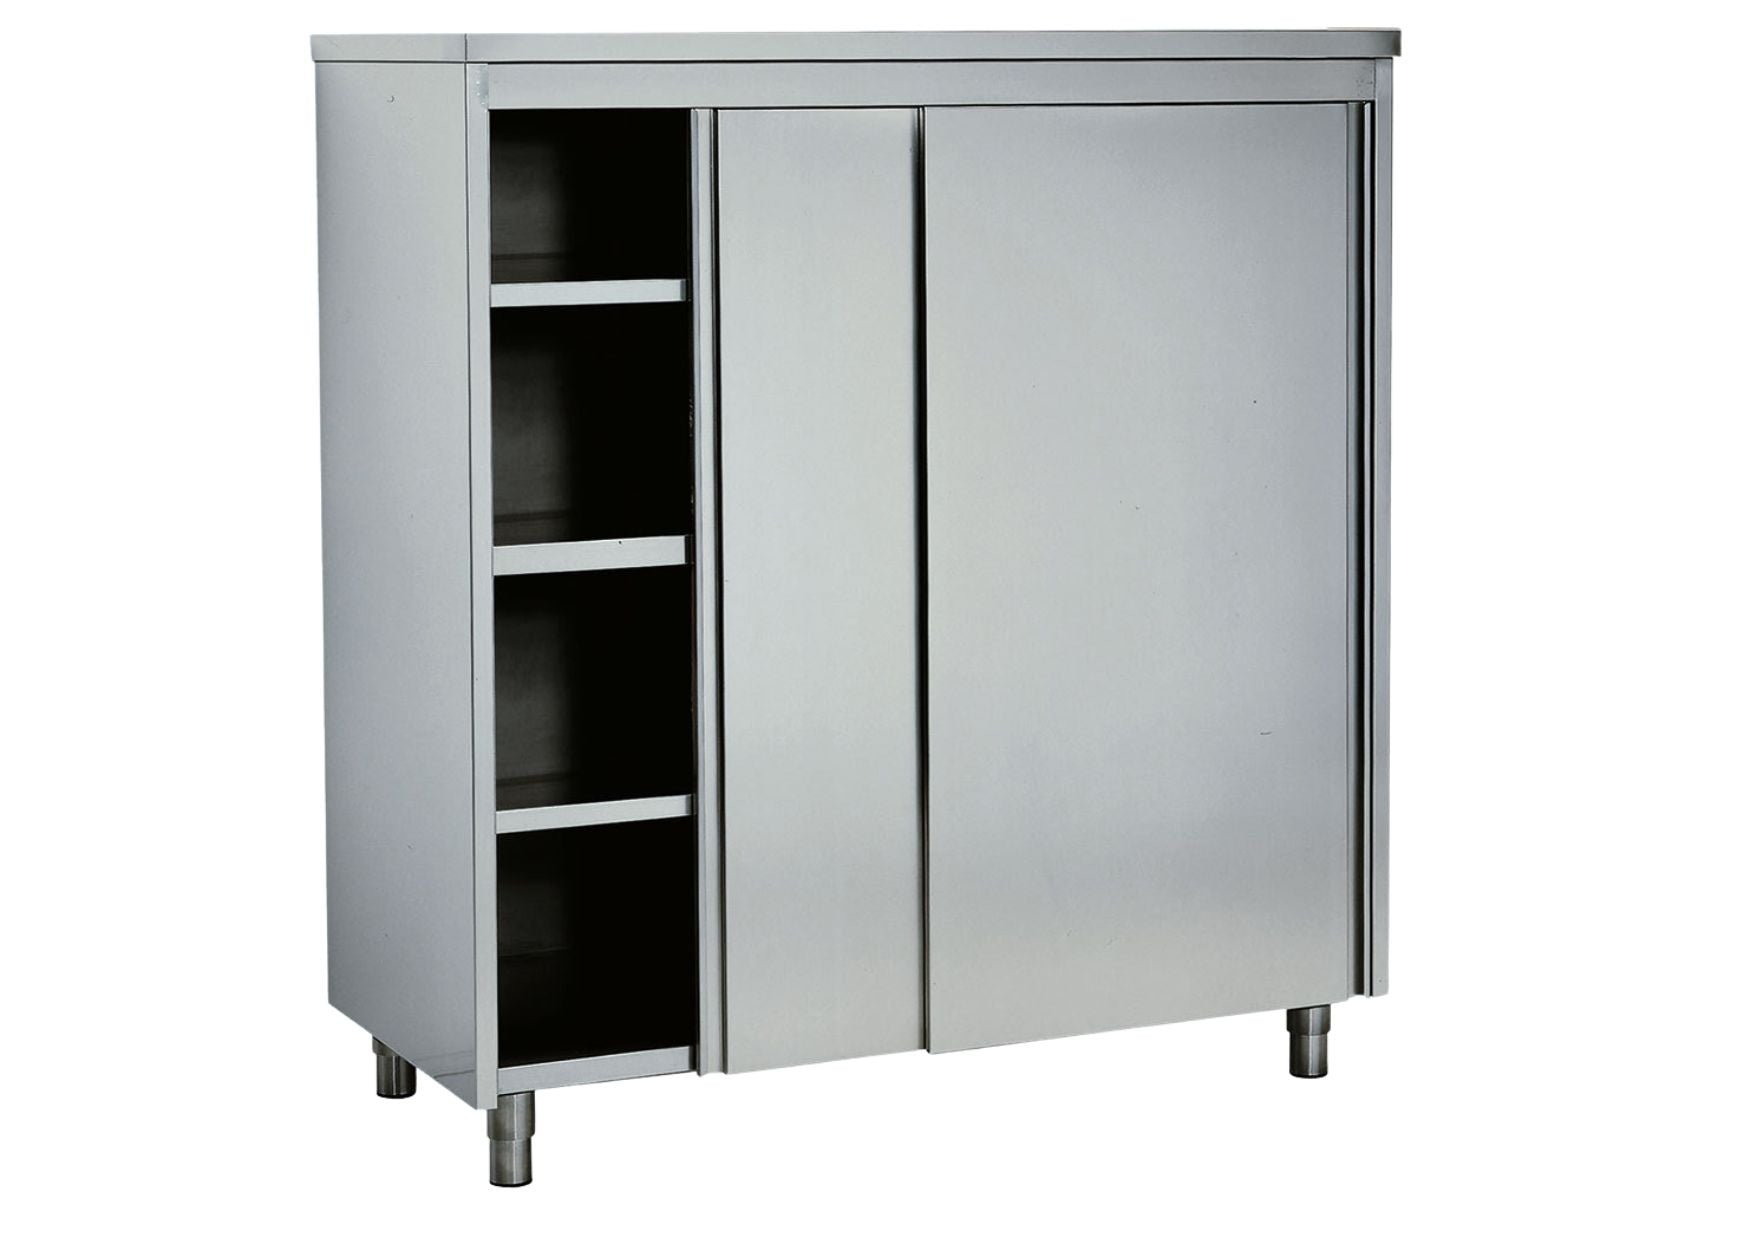 Stainless steel cabinet with sliding doors